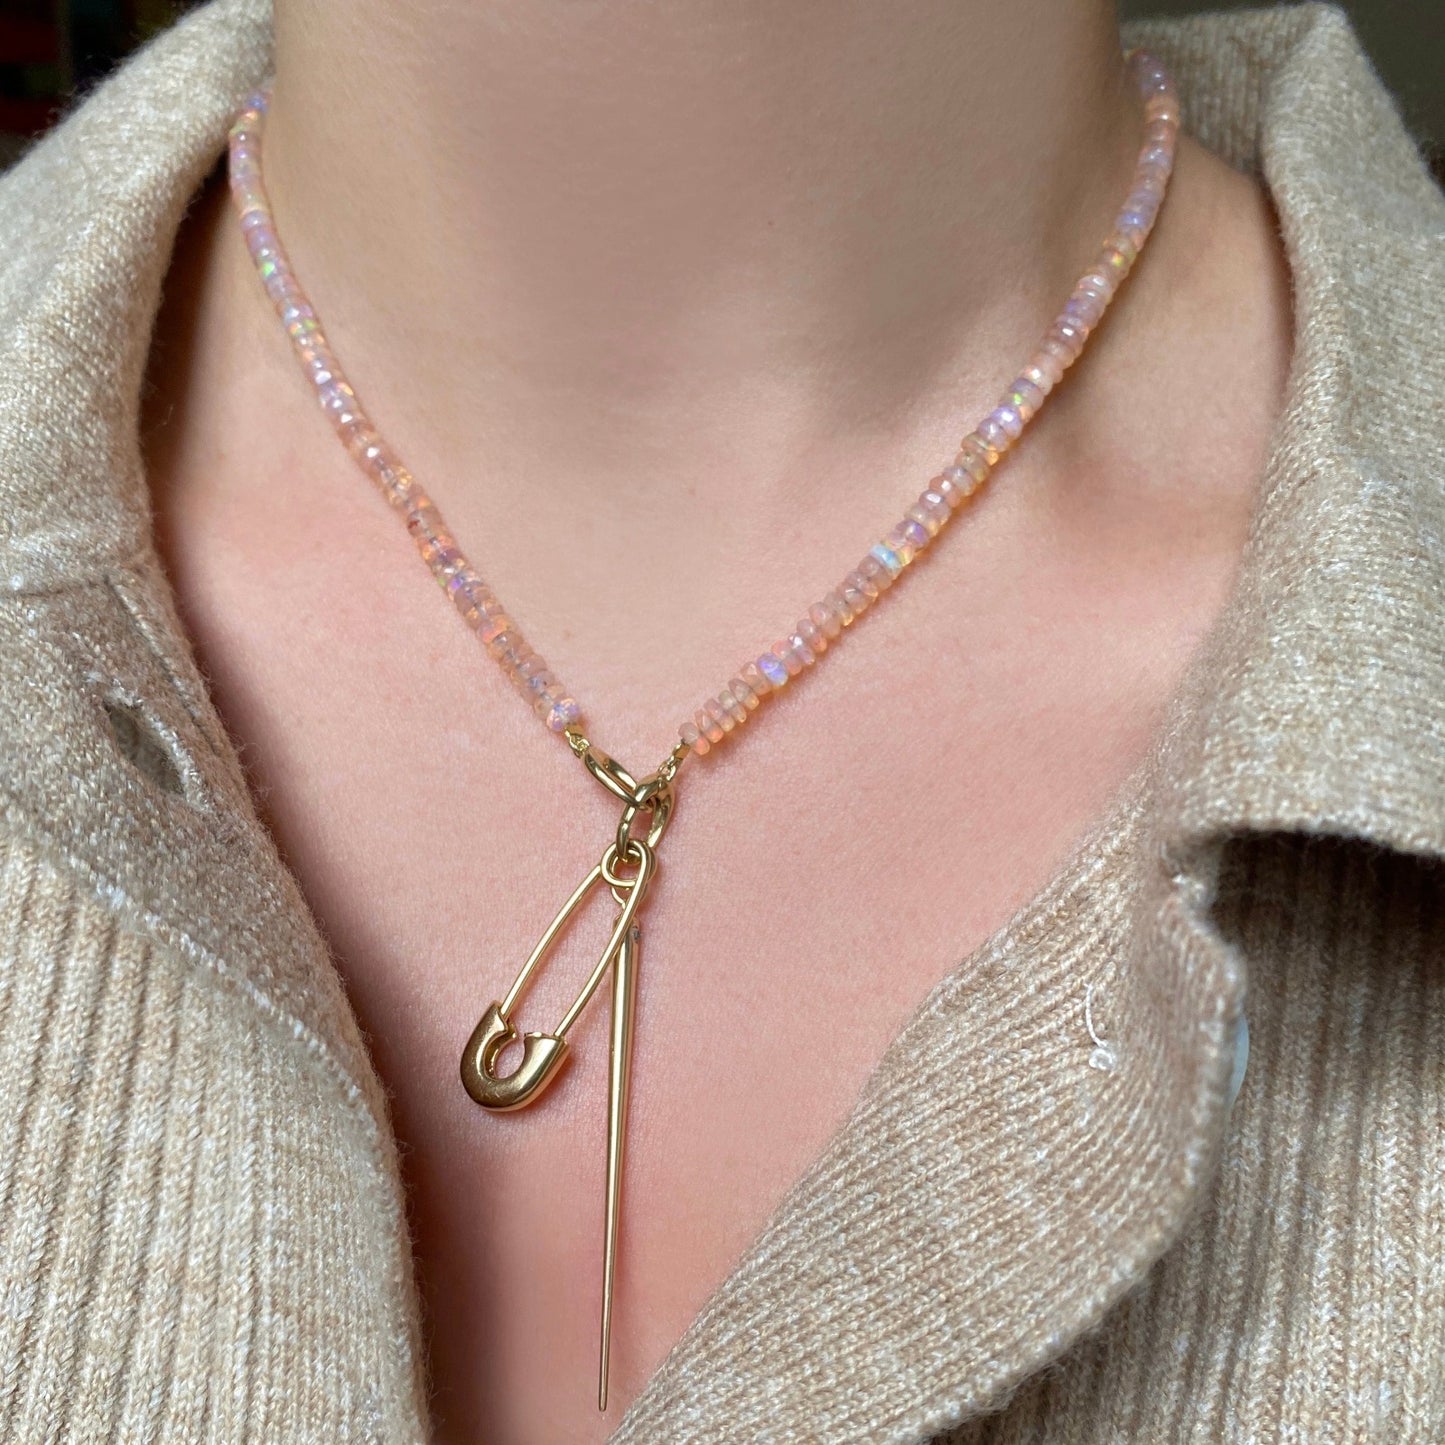 Shimmering beaded necklace made of faceted opals in shades of clear-light pink on a gold linking ovals clasp. Styled on a neck layered with the safety pin and quill spike charms.